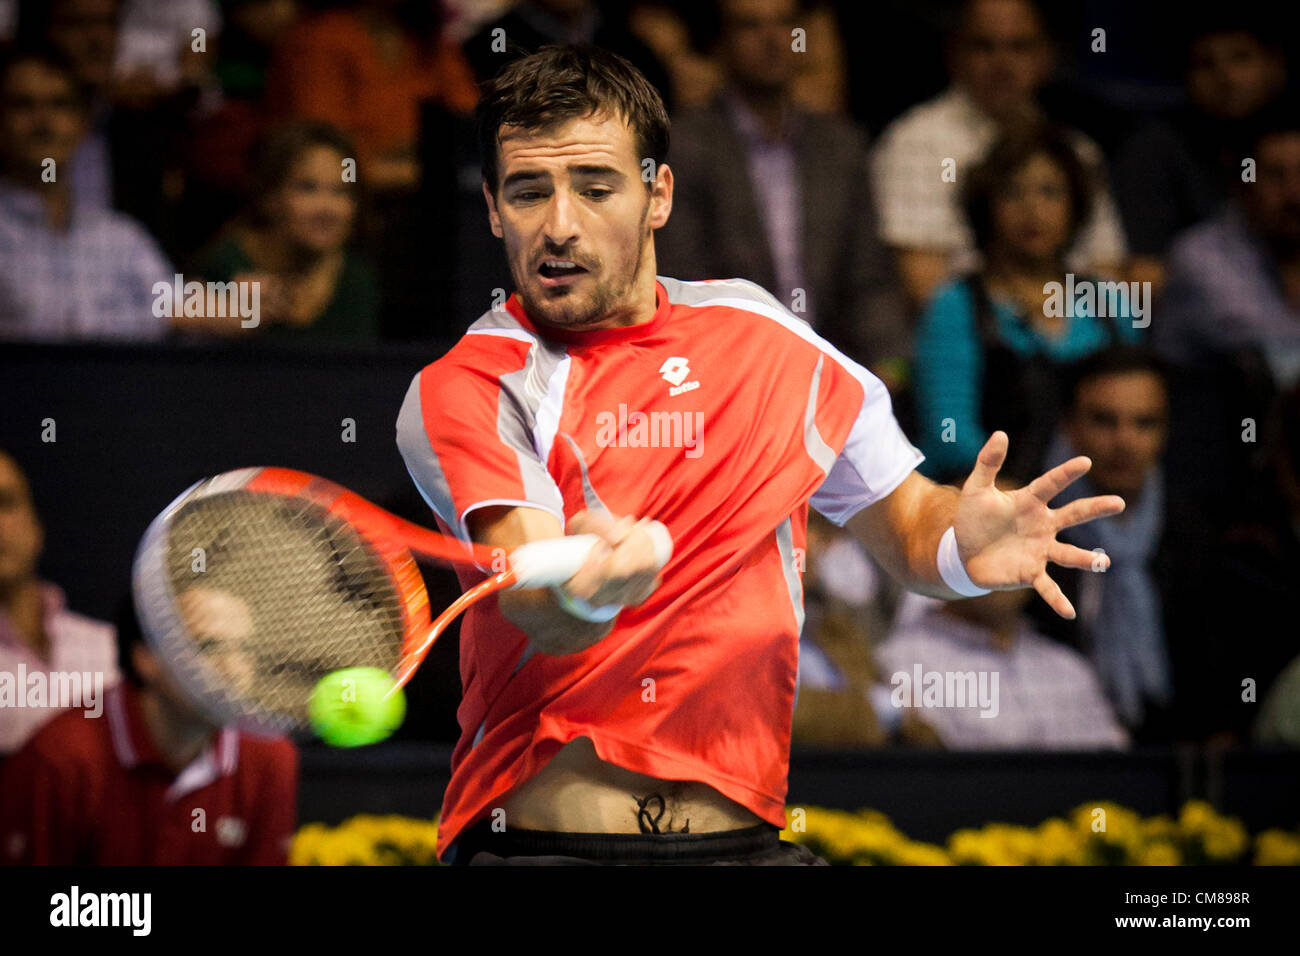 Marin Cilic of Croatia plays a forehand return to Norbert Gombos of Slovakia during their second round match at the Australian Open tennis championships in Melbourne, Australia, Thursday, Jan